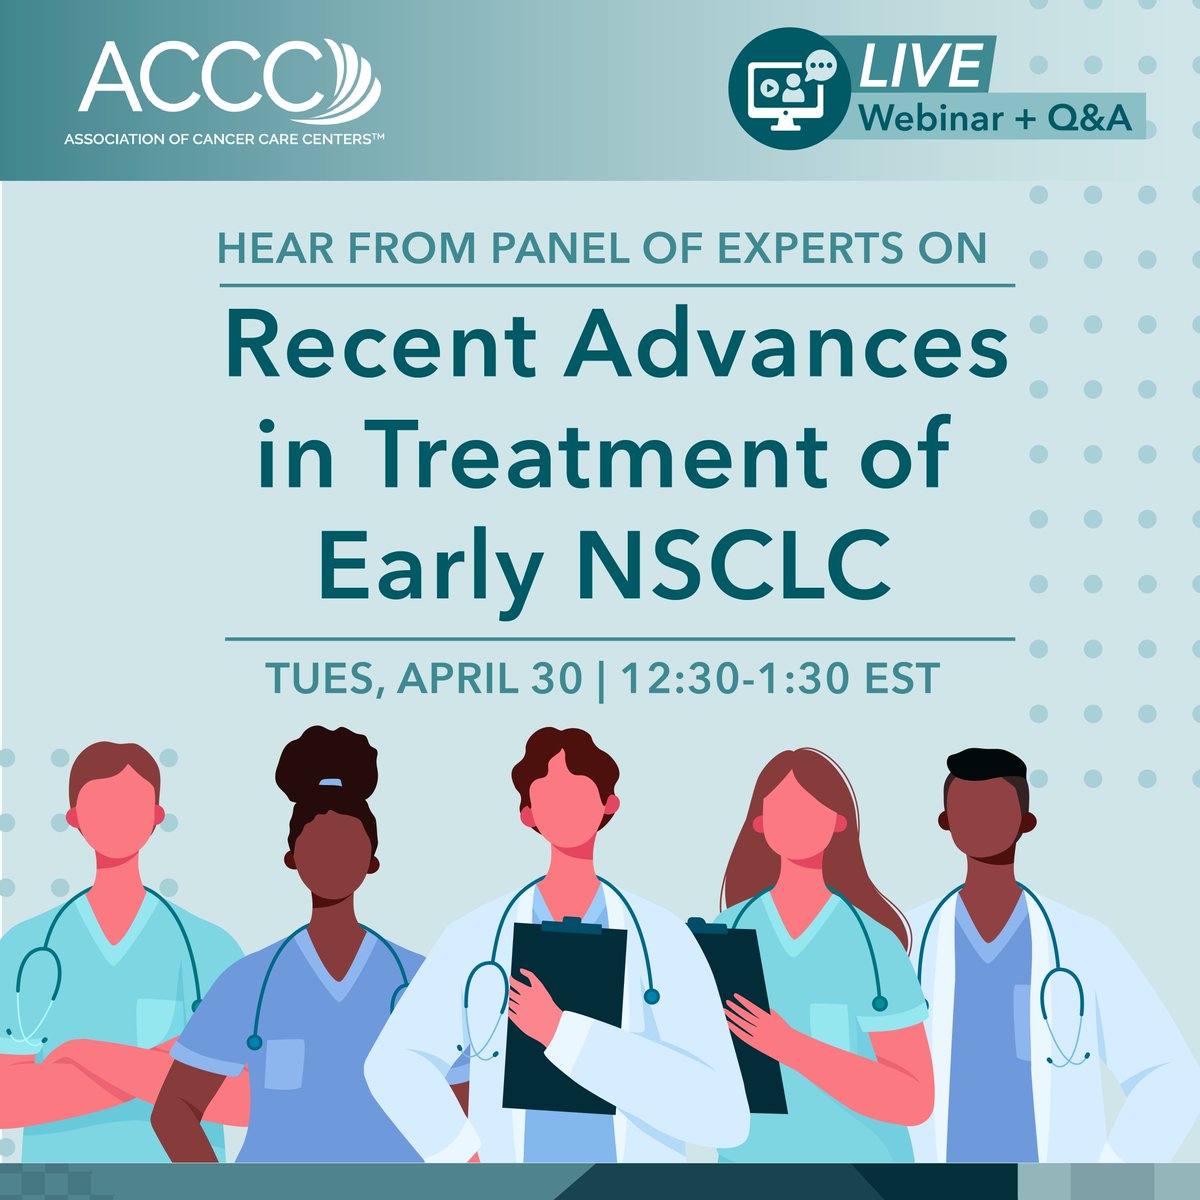 Hear from an expert multidisciplinary panel about recent advances in treatment of early-stage #NSCLC. Discuss use of #radiationtherapy and the importance of #patientnavigation to coordinate the best #cancercare. Register: bit.ly/3UdORg1.